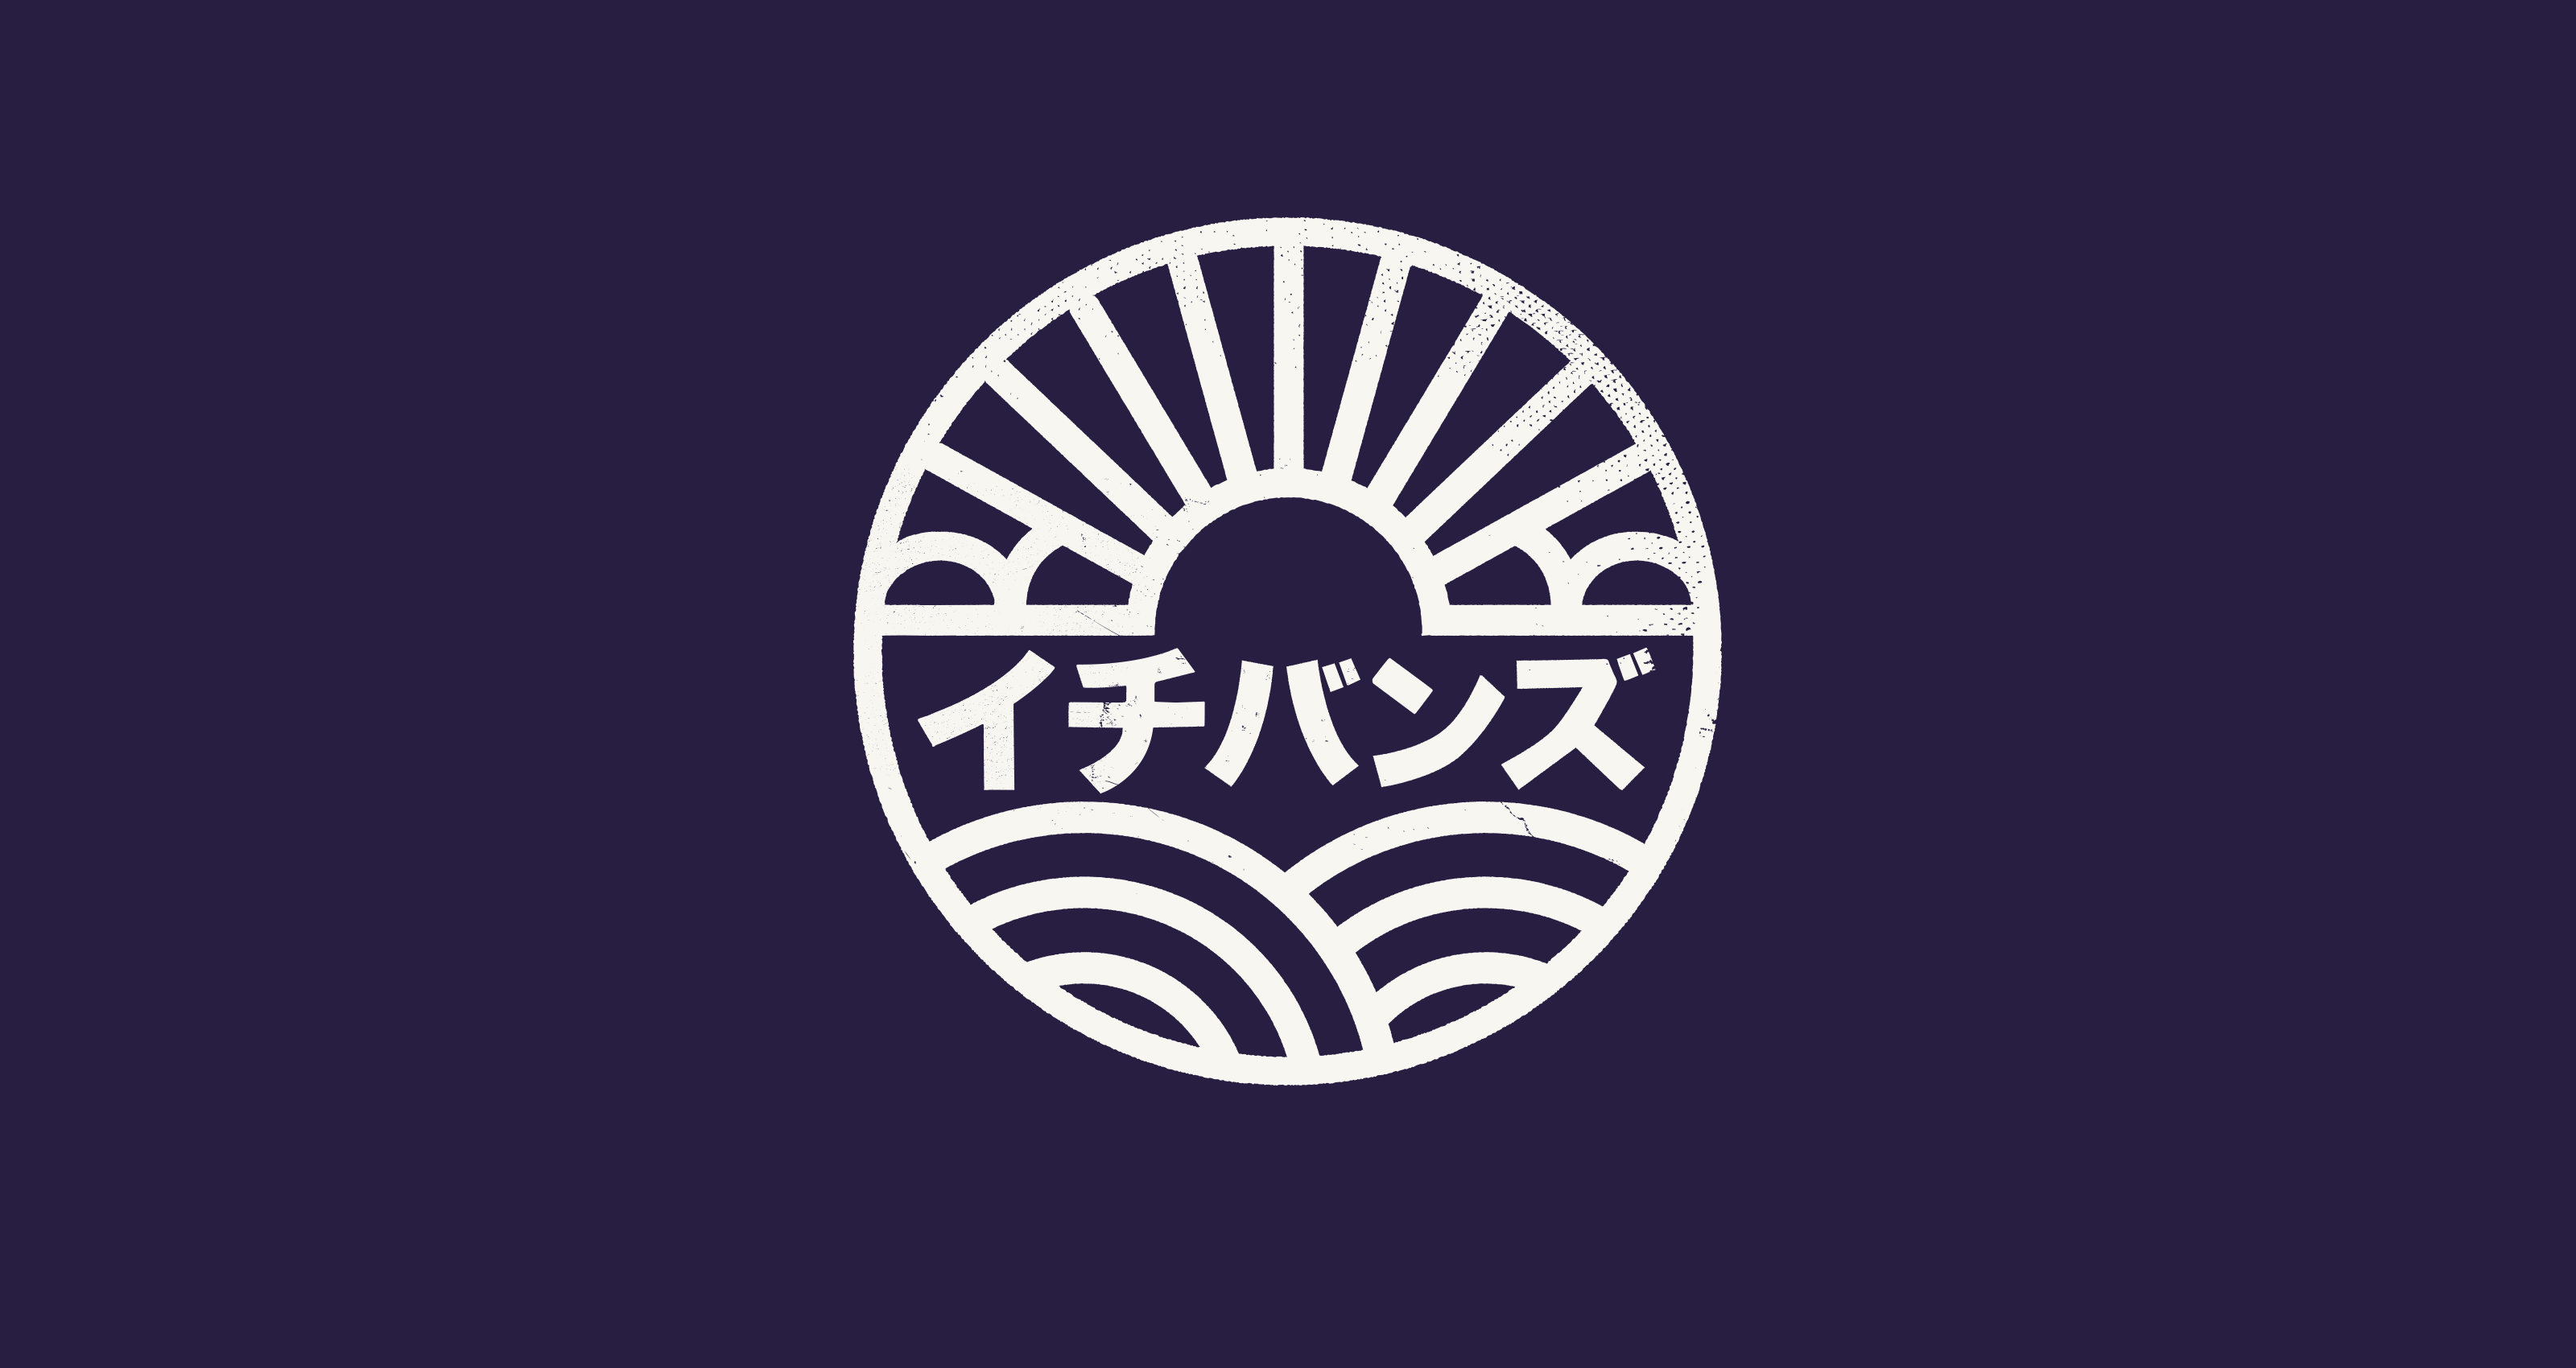 Symmetrical logo design inspired by traditional Japanese woodblock  printing